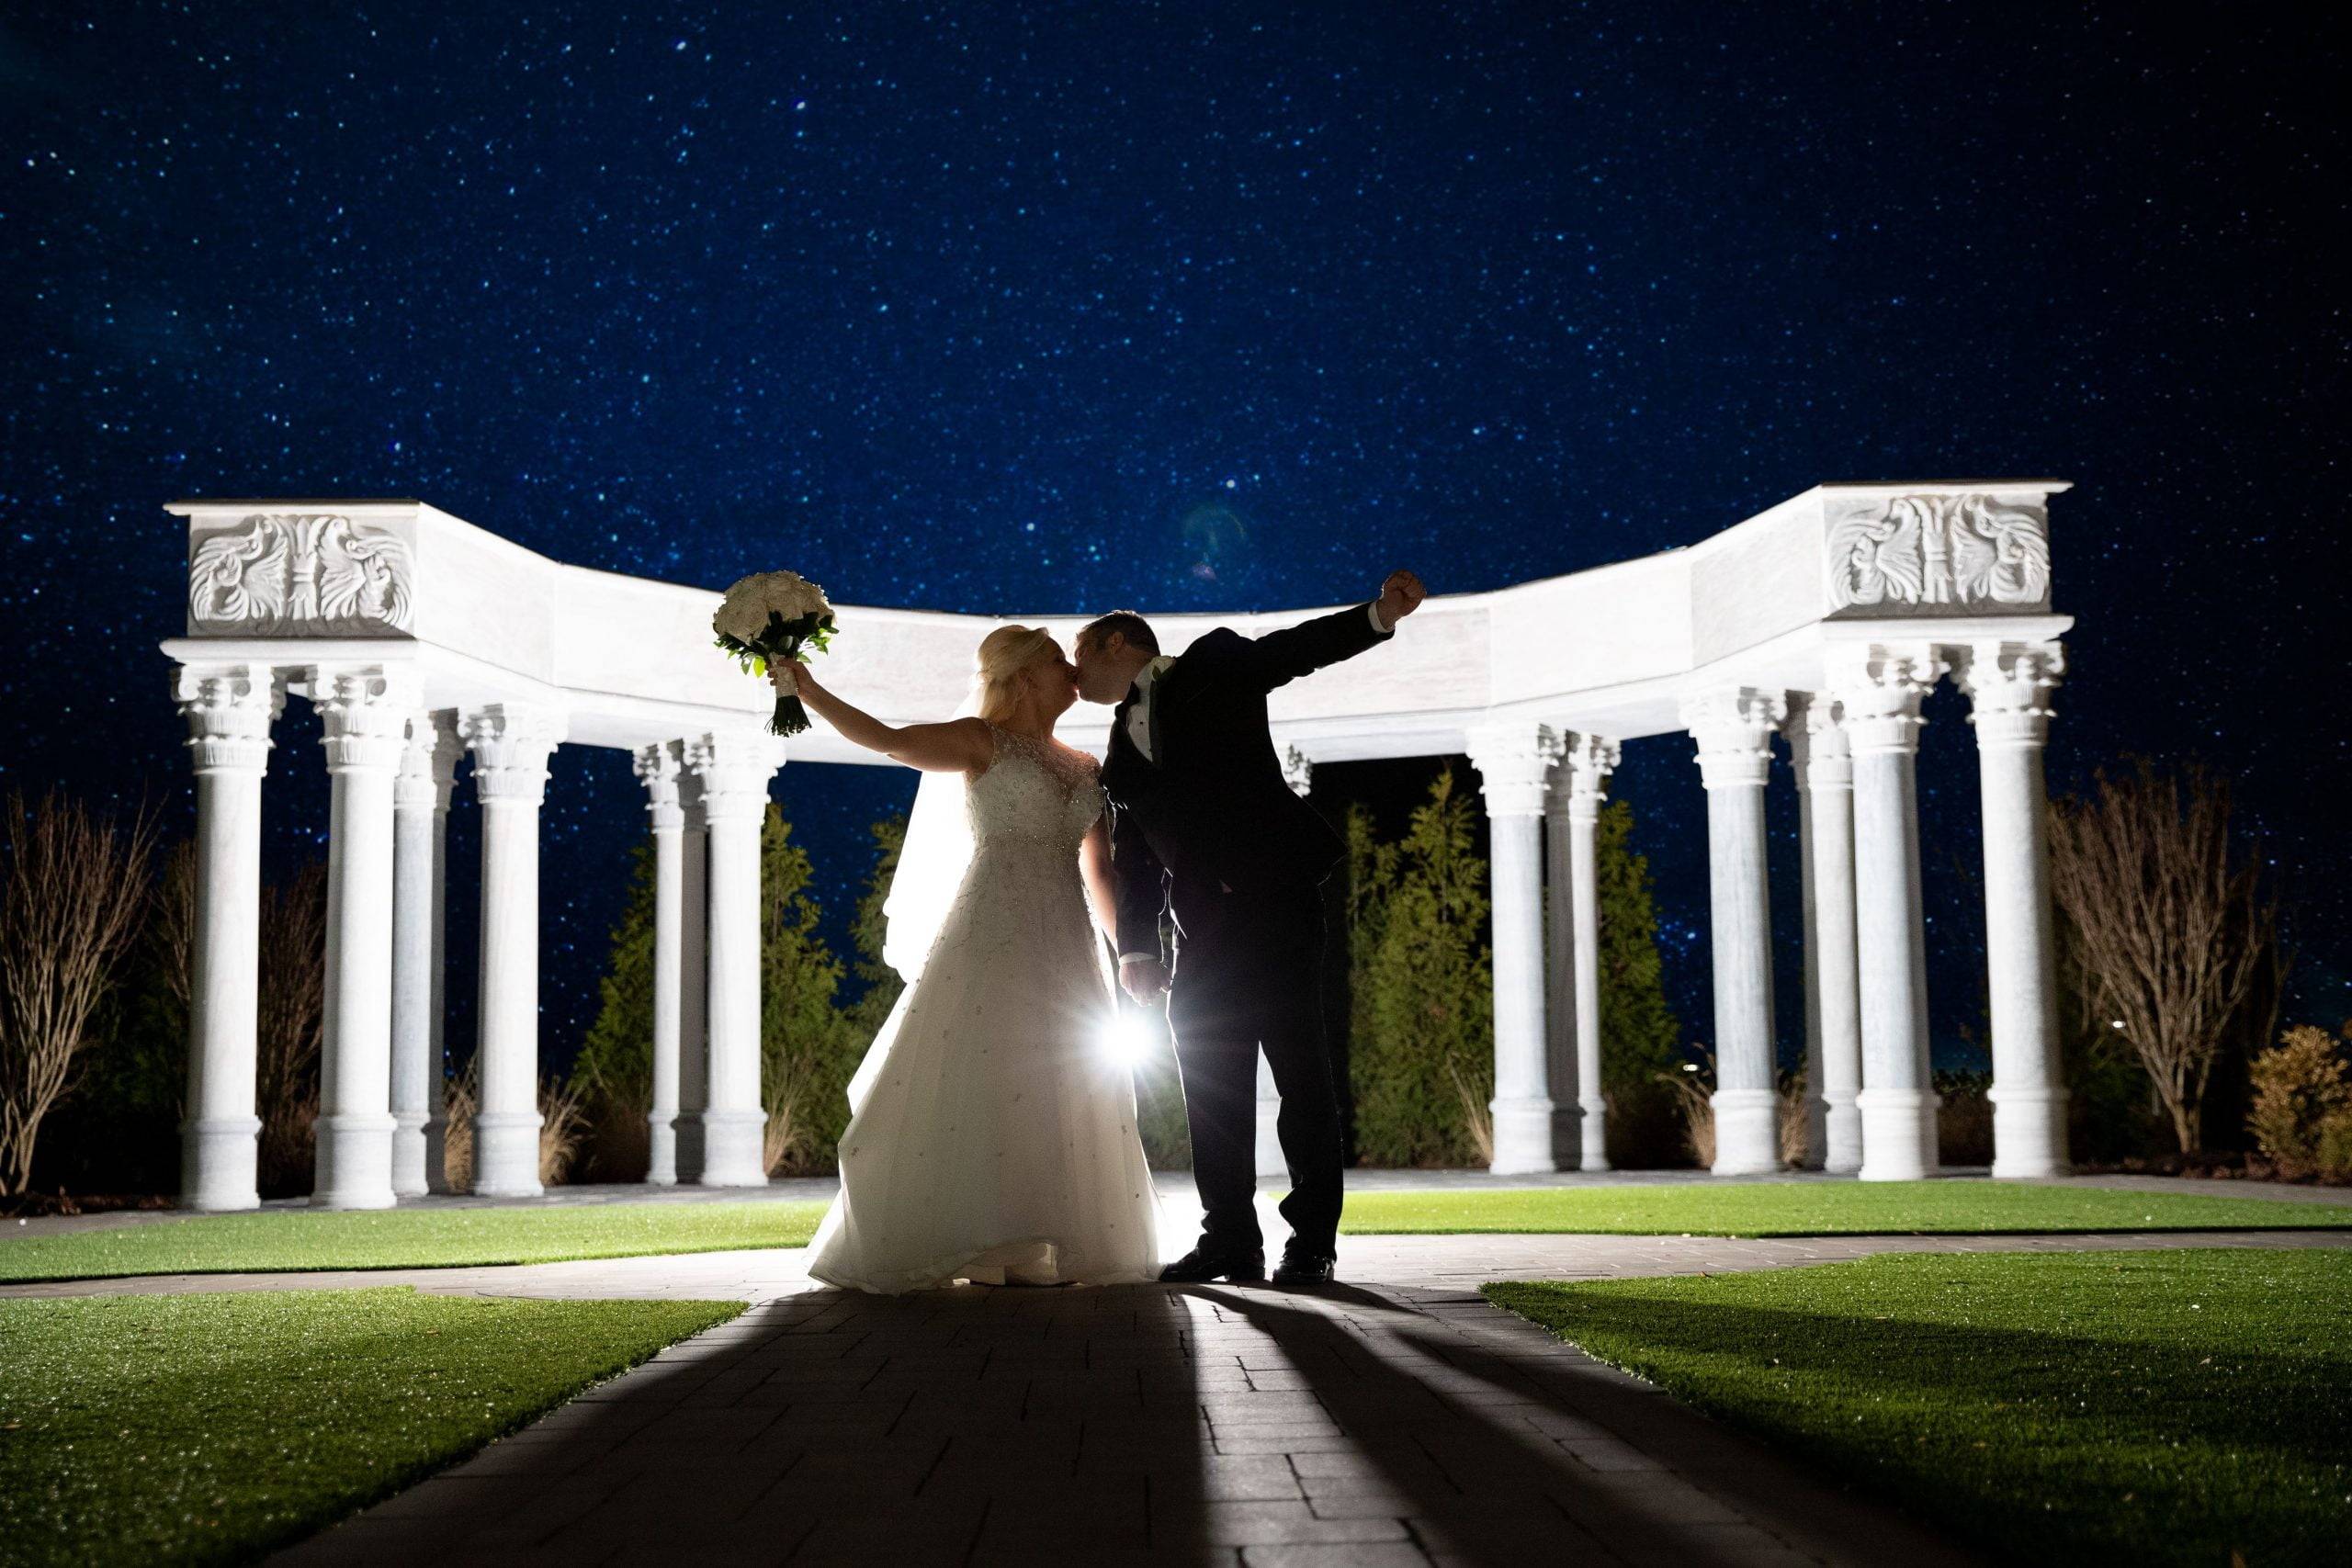 A bride and groom standing in front of a gazebo at night.